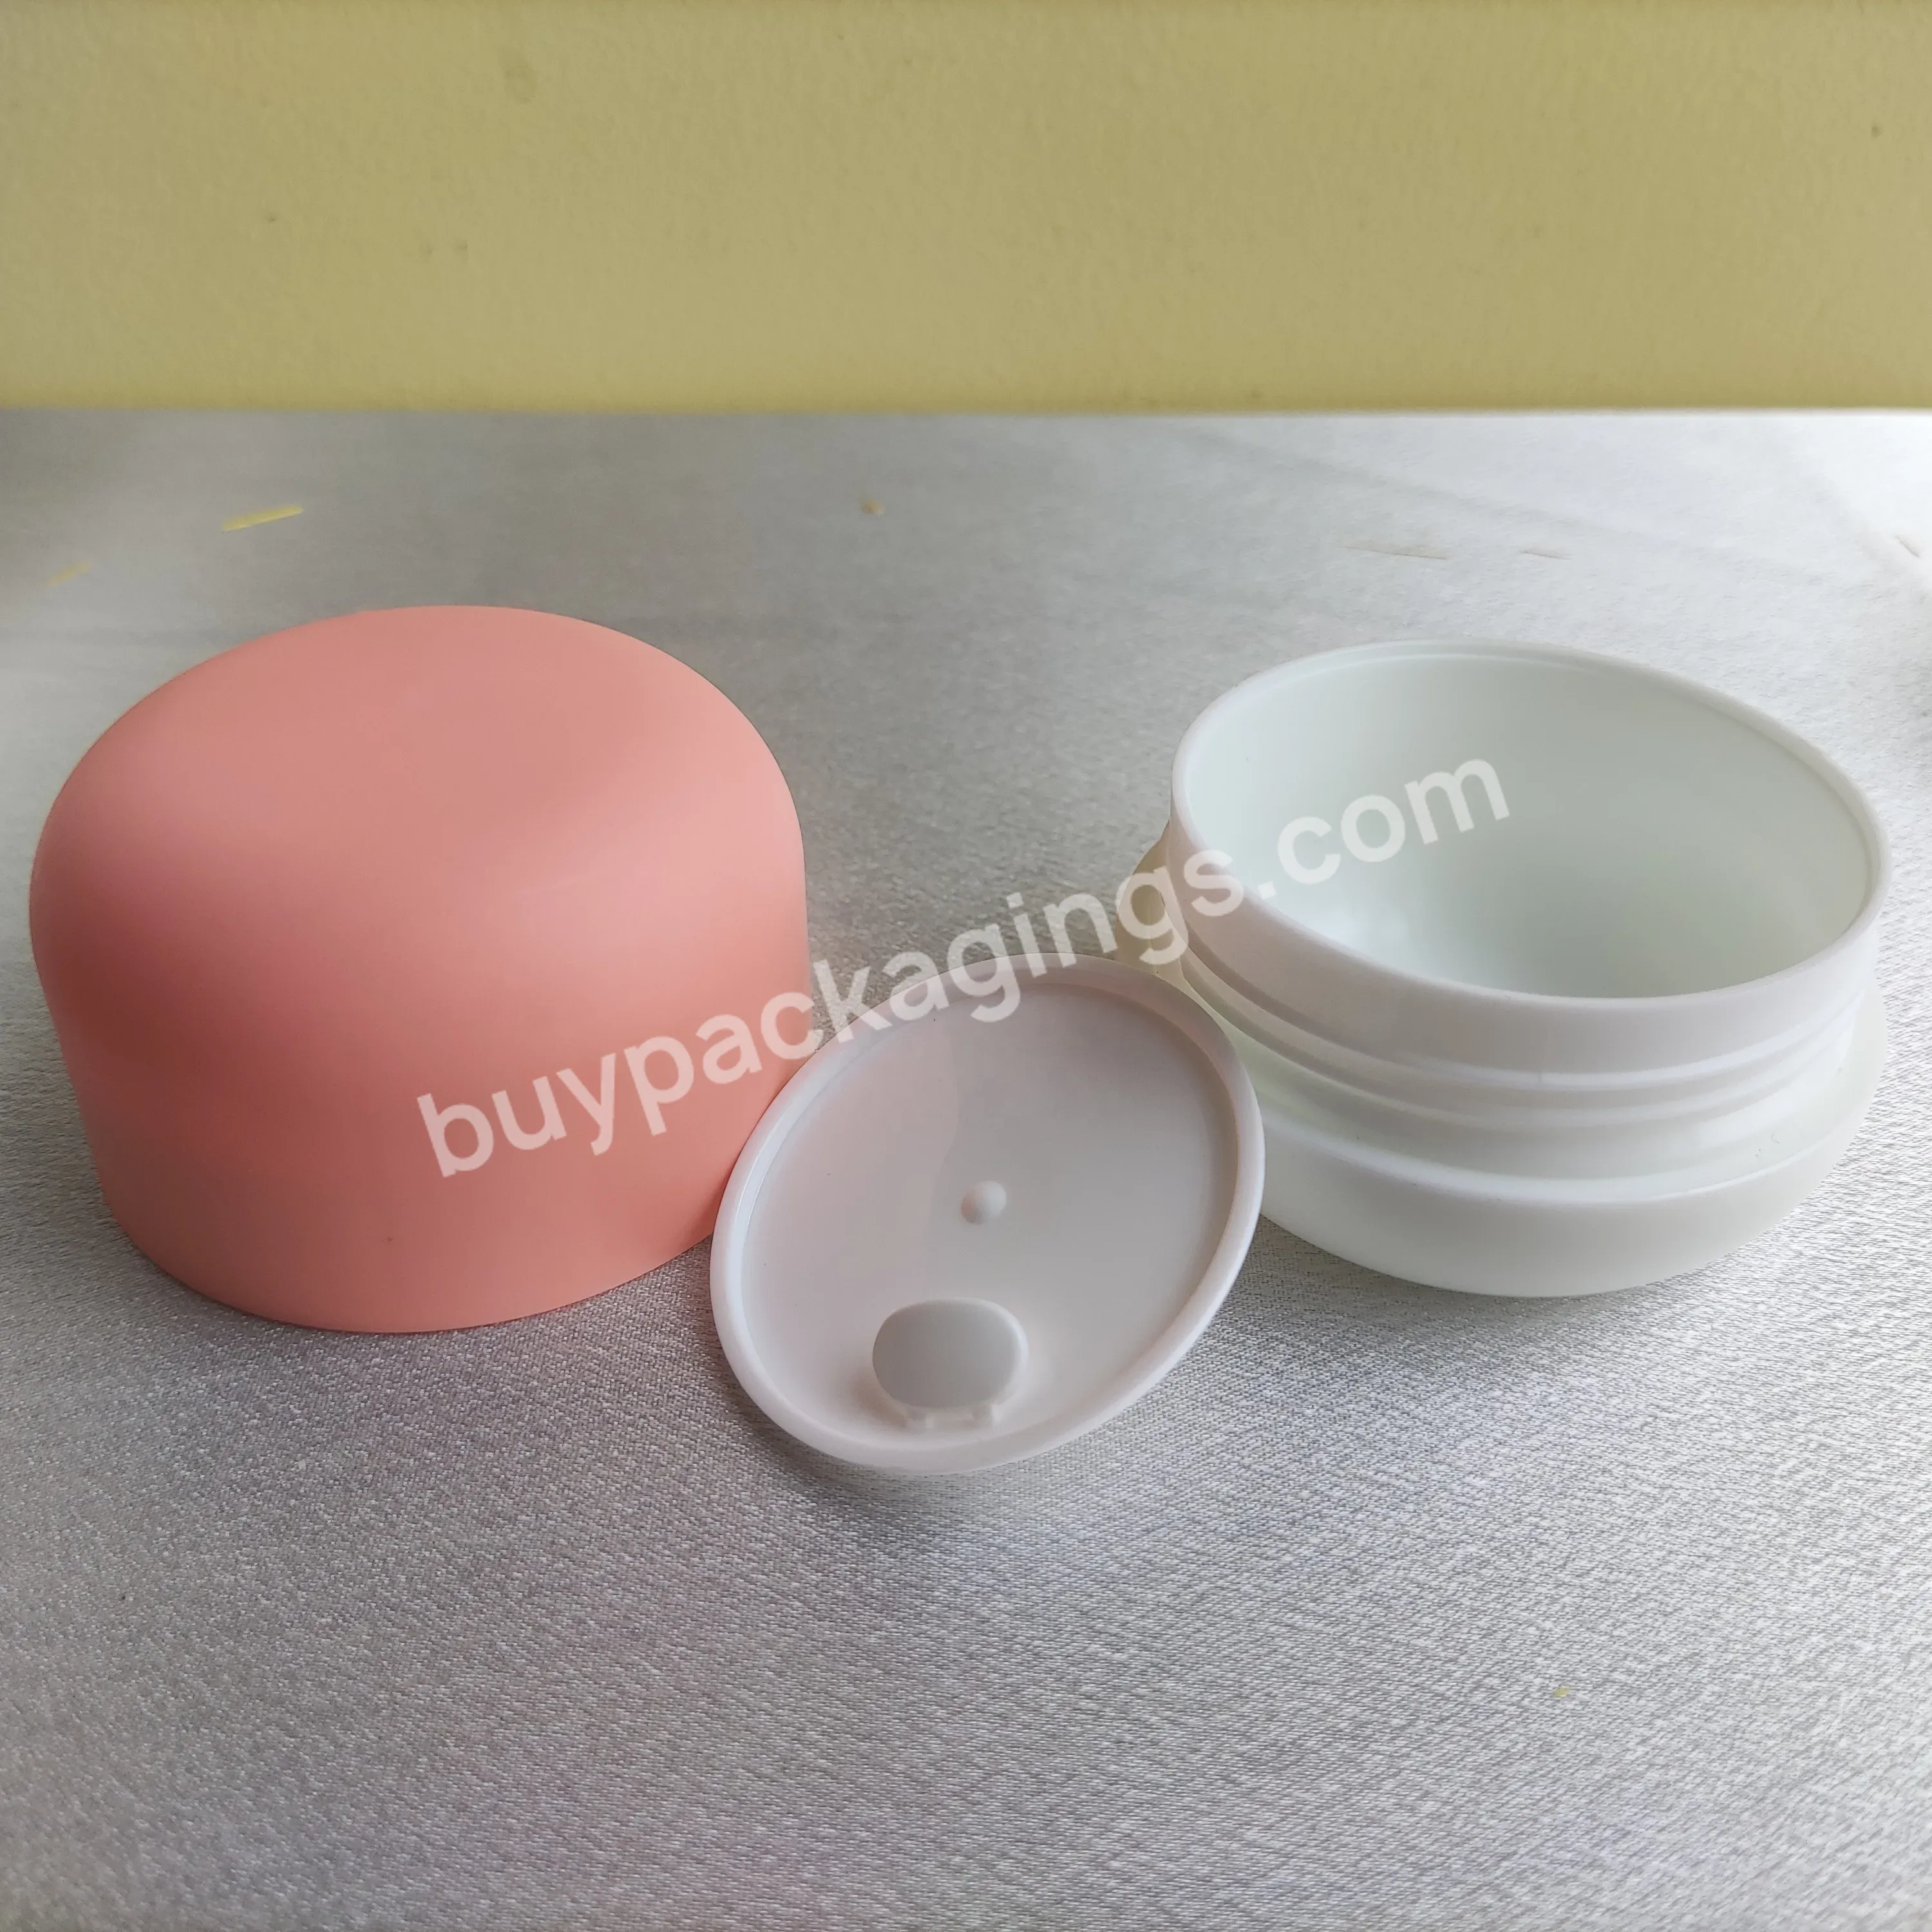 30g 50g Baby Face Cream Cosmetic Packaging Containers Double Wall Plastic Jar With Lids - Buy Cosmetic Packaging Containers,Double Wall Jar,Plastic Jar With Lids.